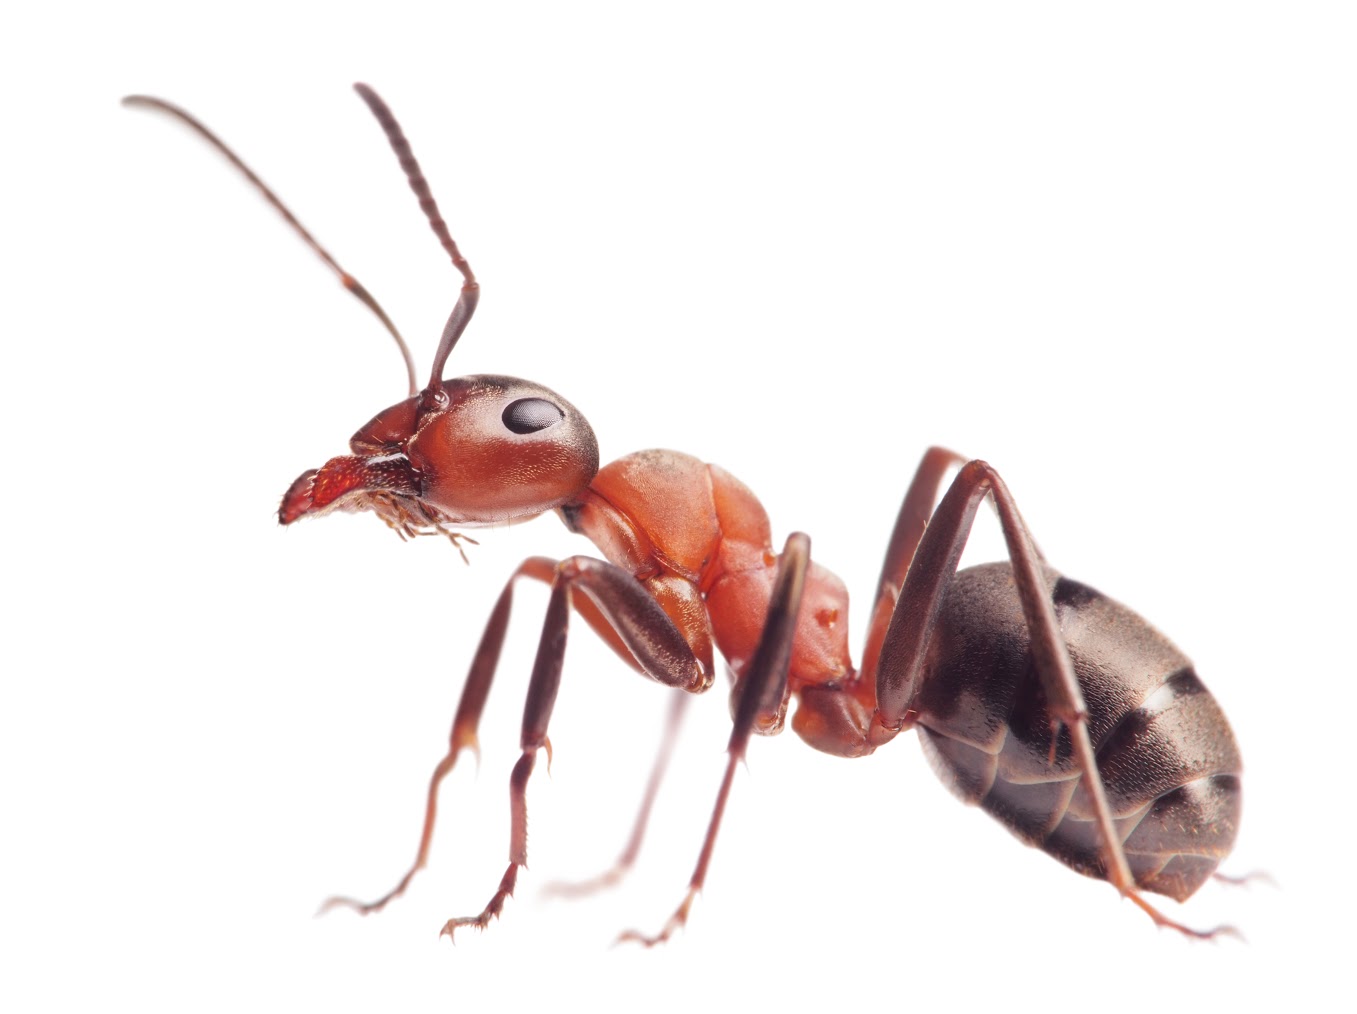 Ant Identification Guide - How To Identify Ants - DoMyOwn.com